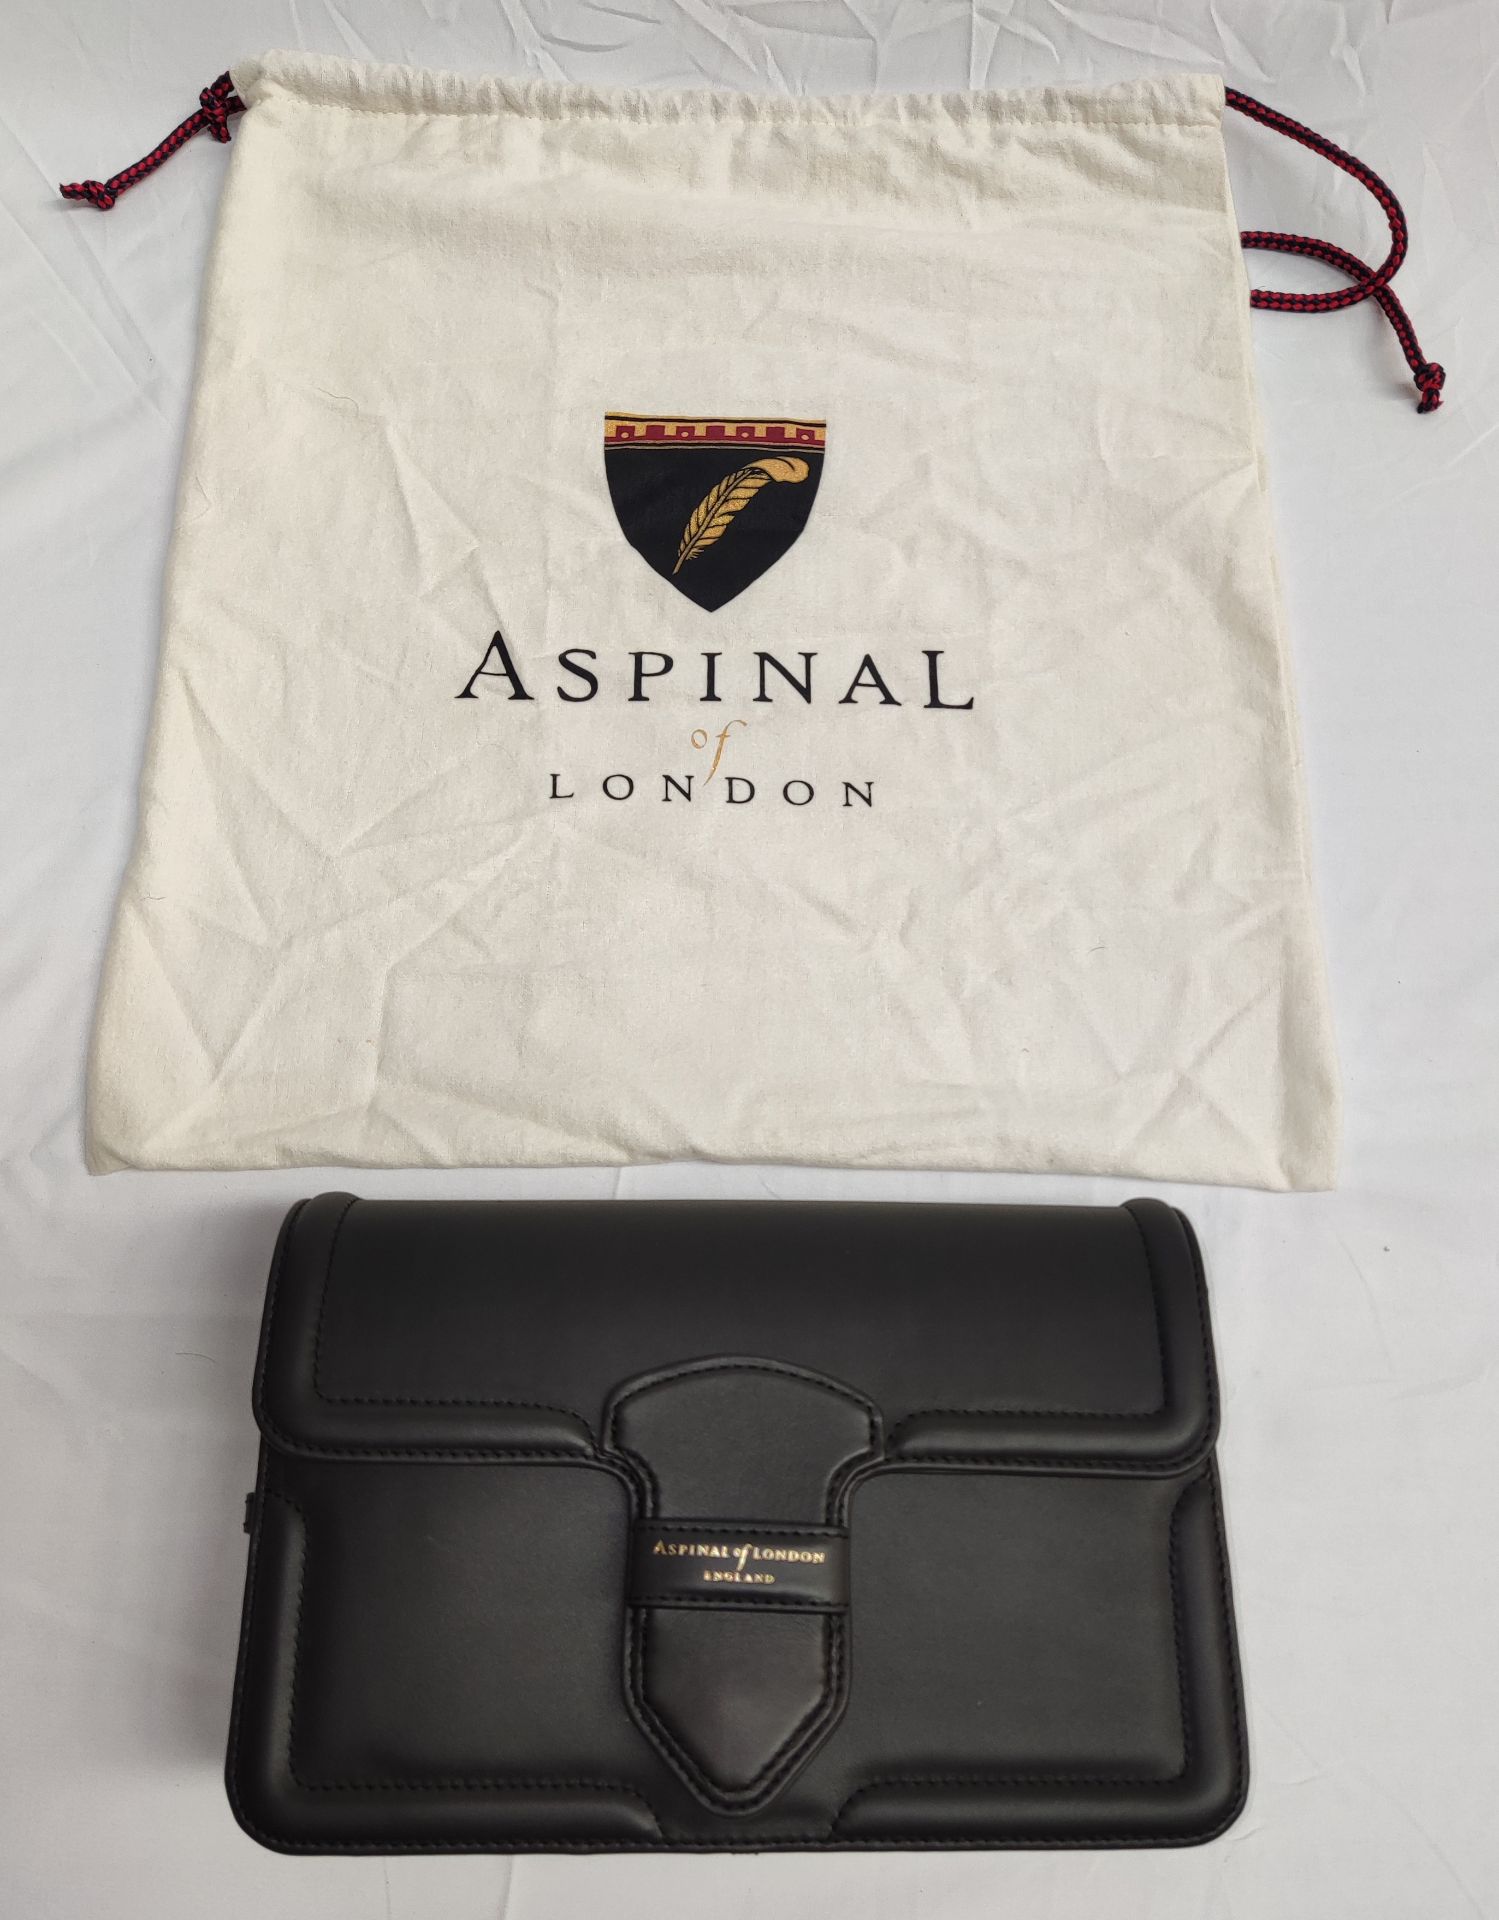 1 x ASPINAL OF LONDON The Resort Leather Bag In Smooth Black - Boxed - Original RRP £525 - Ref: - Image 10 of 24